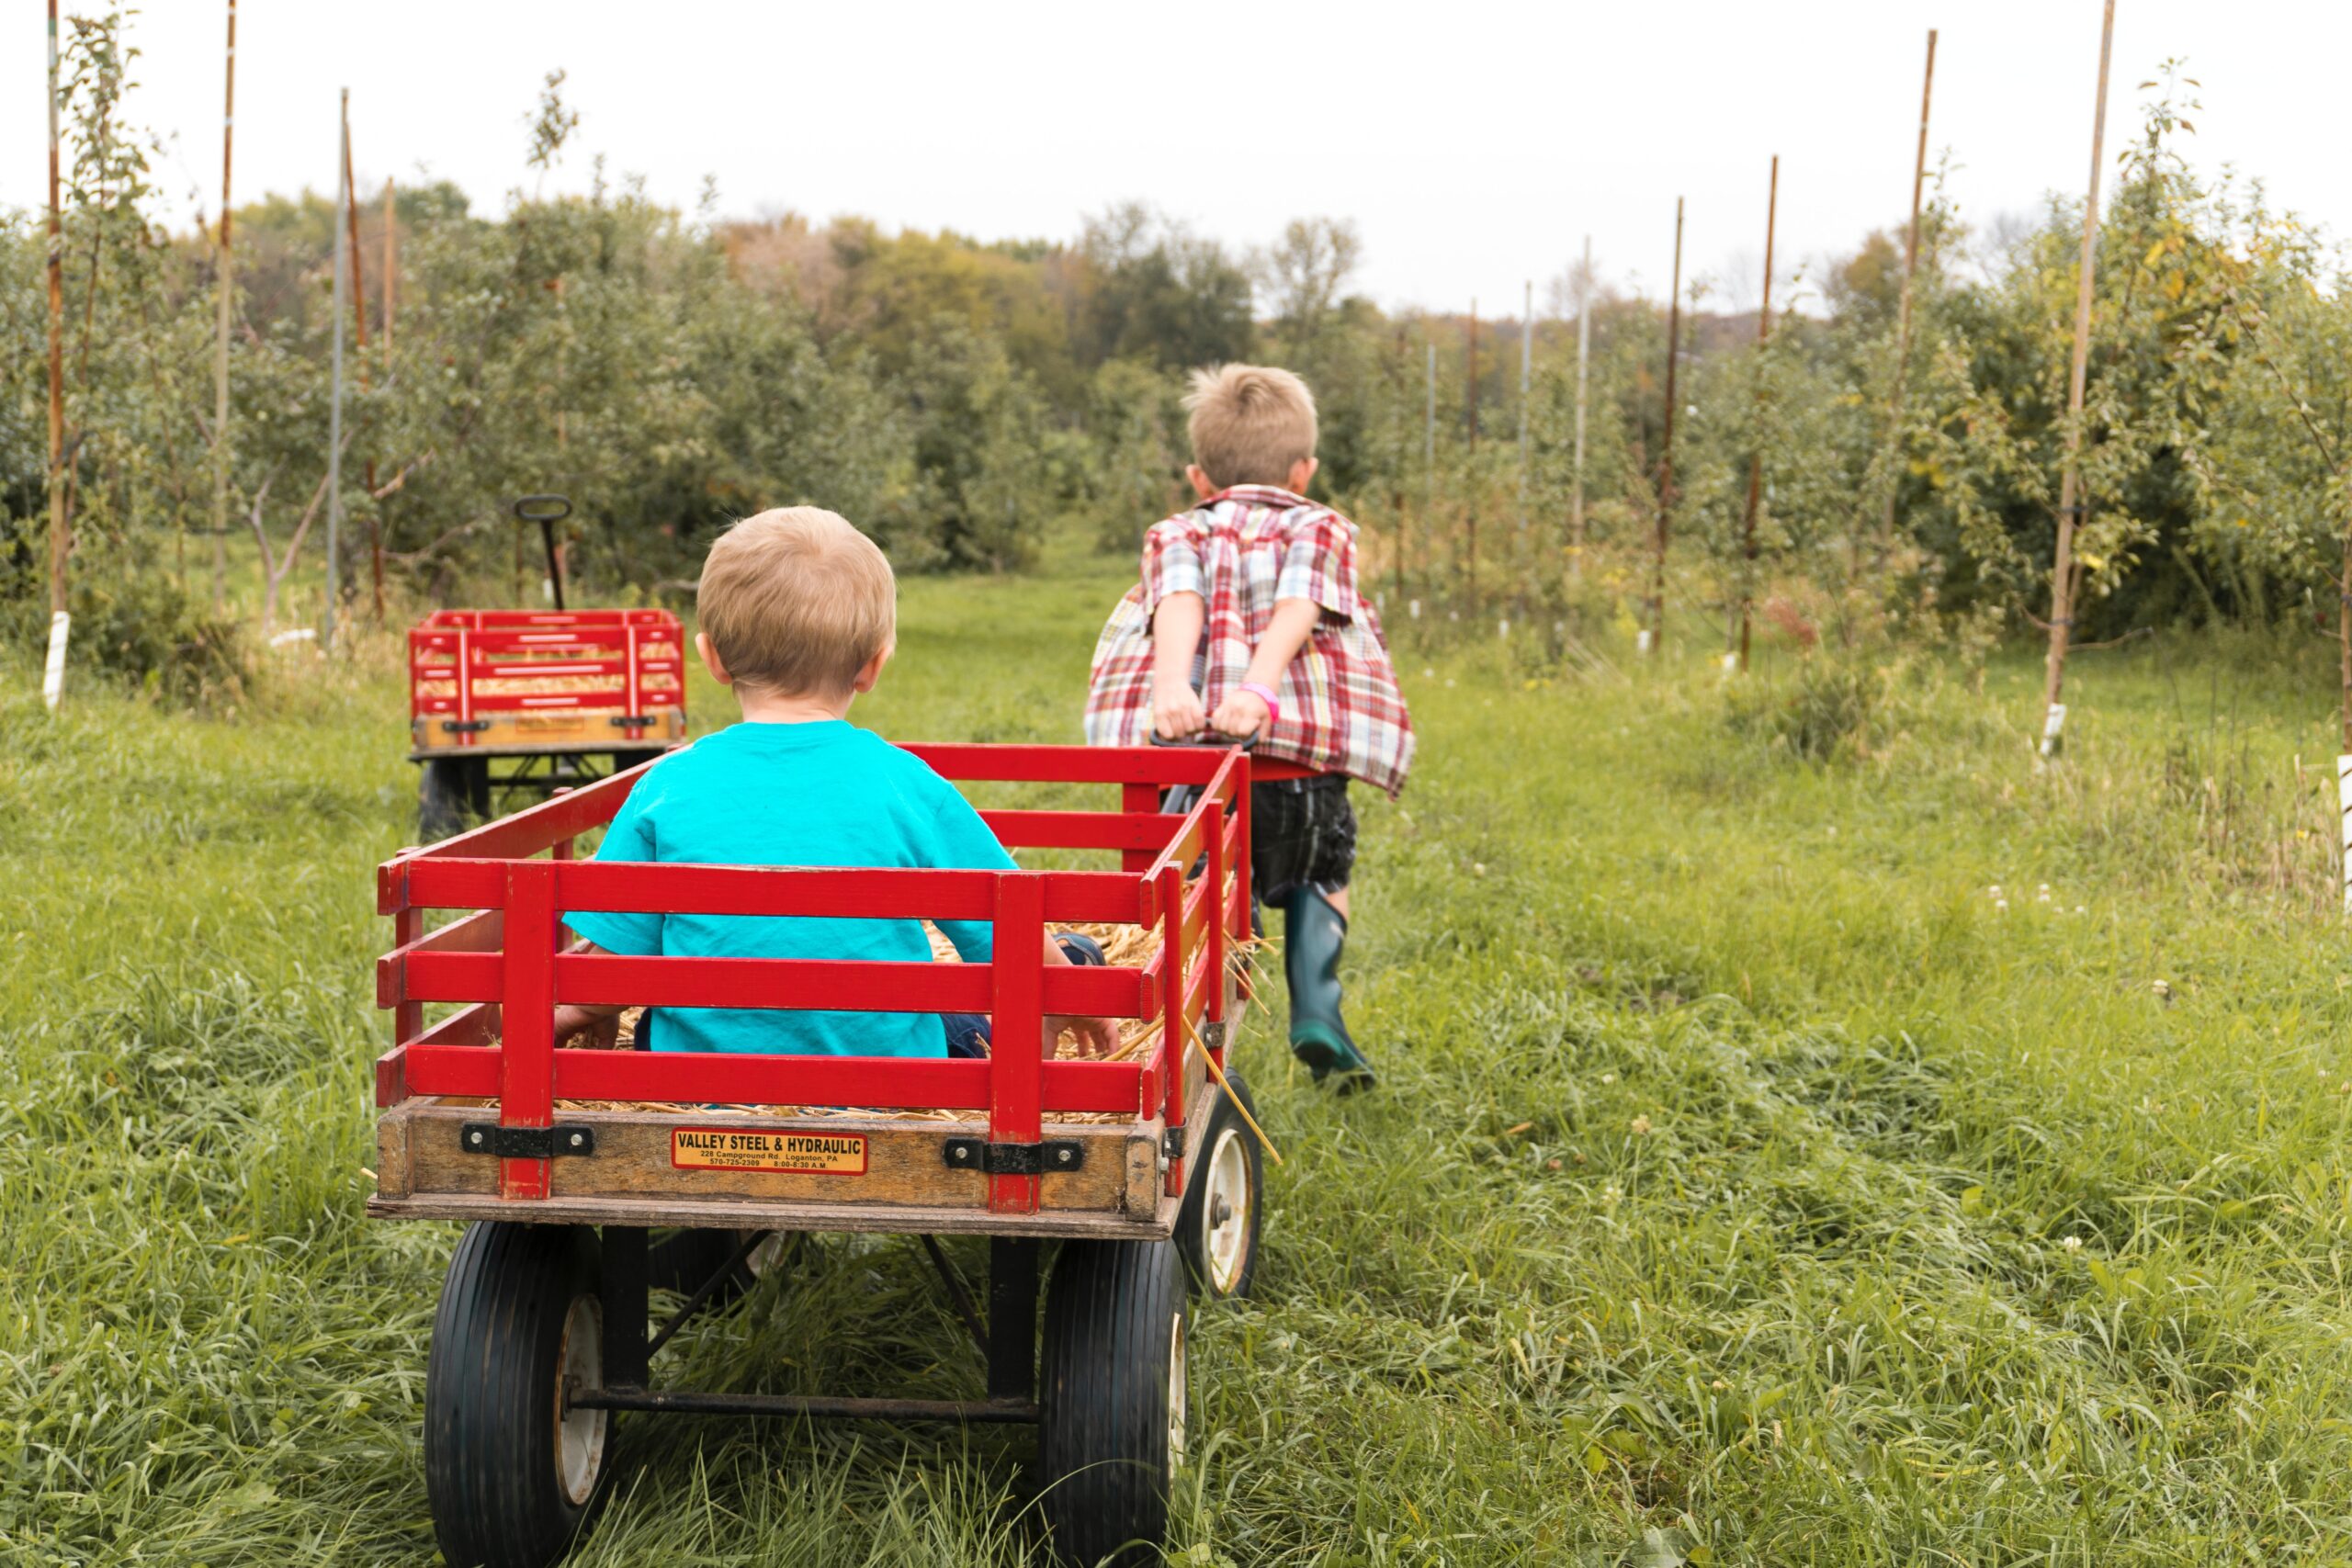 Camping Trolley. A young boy pulling another little boy in a red wooden cart. Photo by Matt Reed on Unsplash